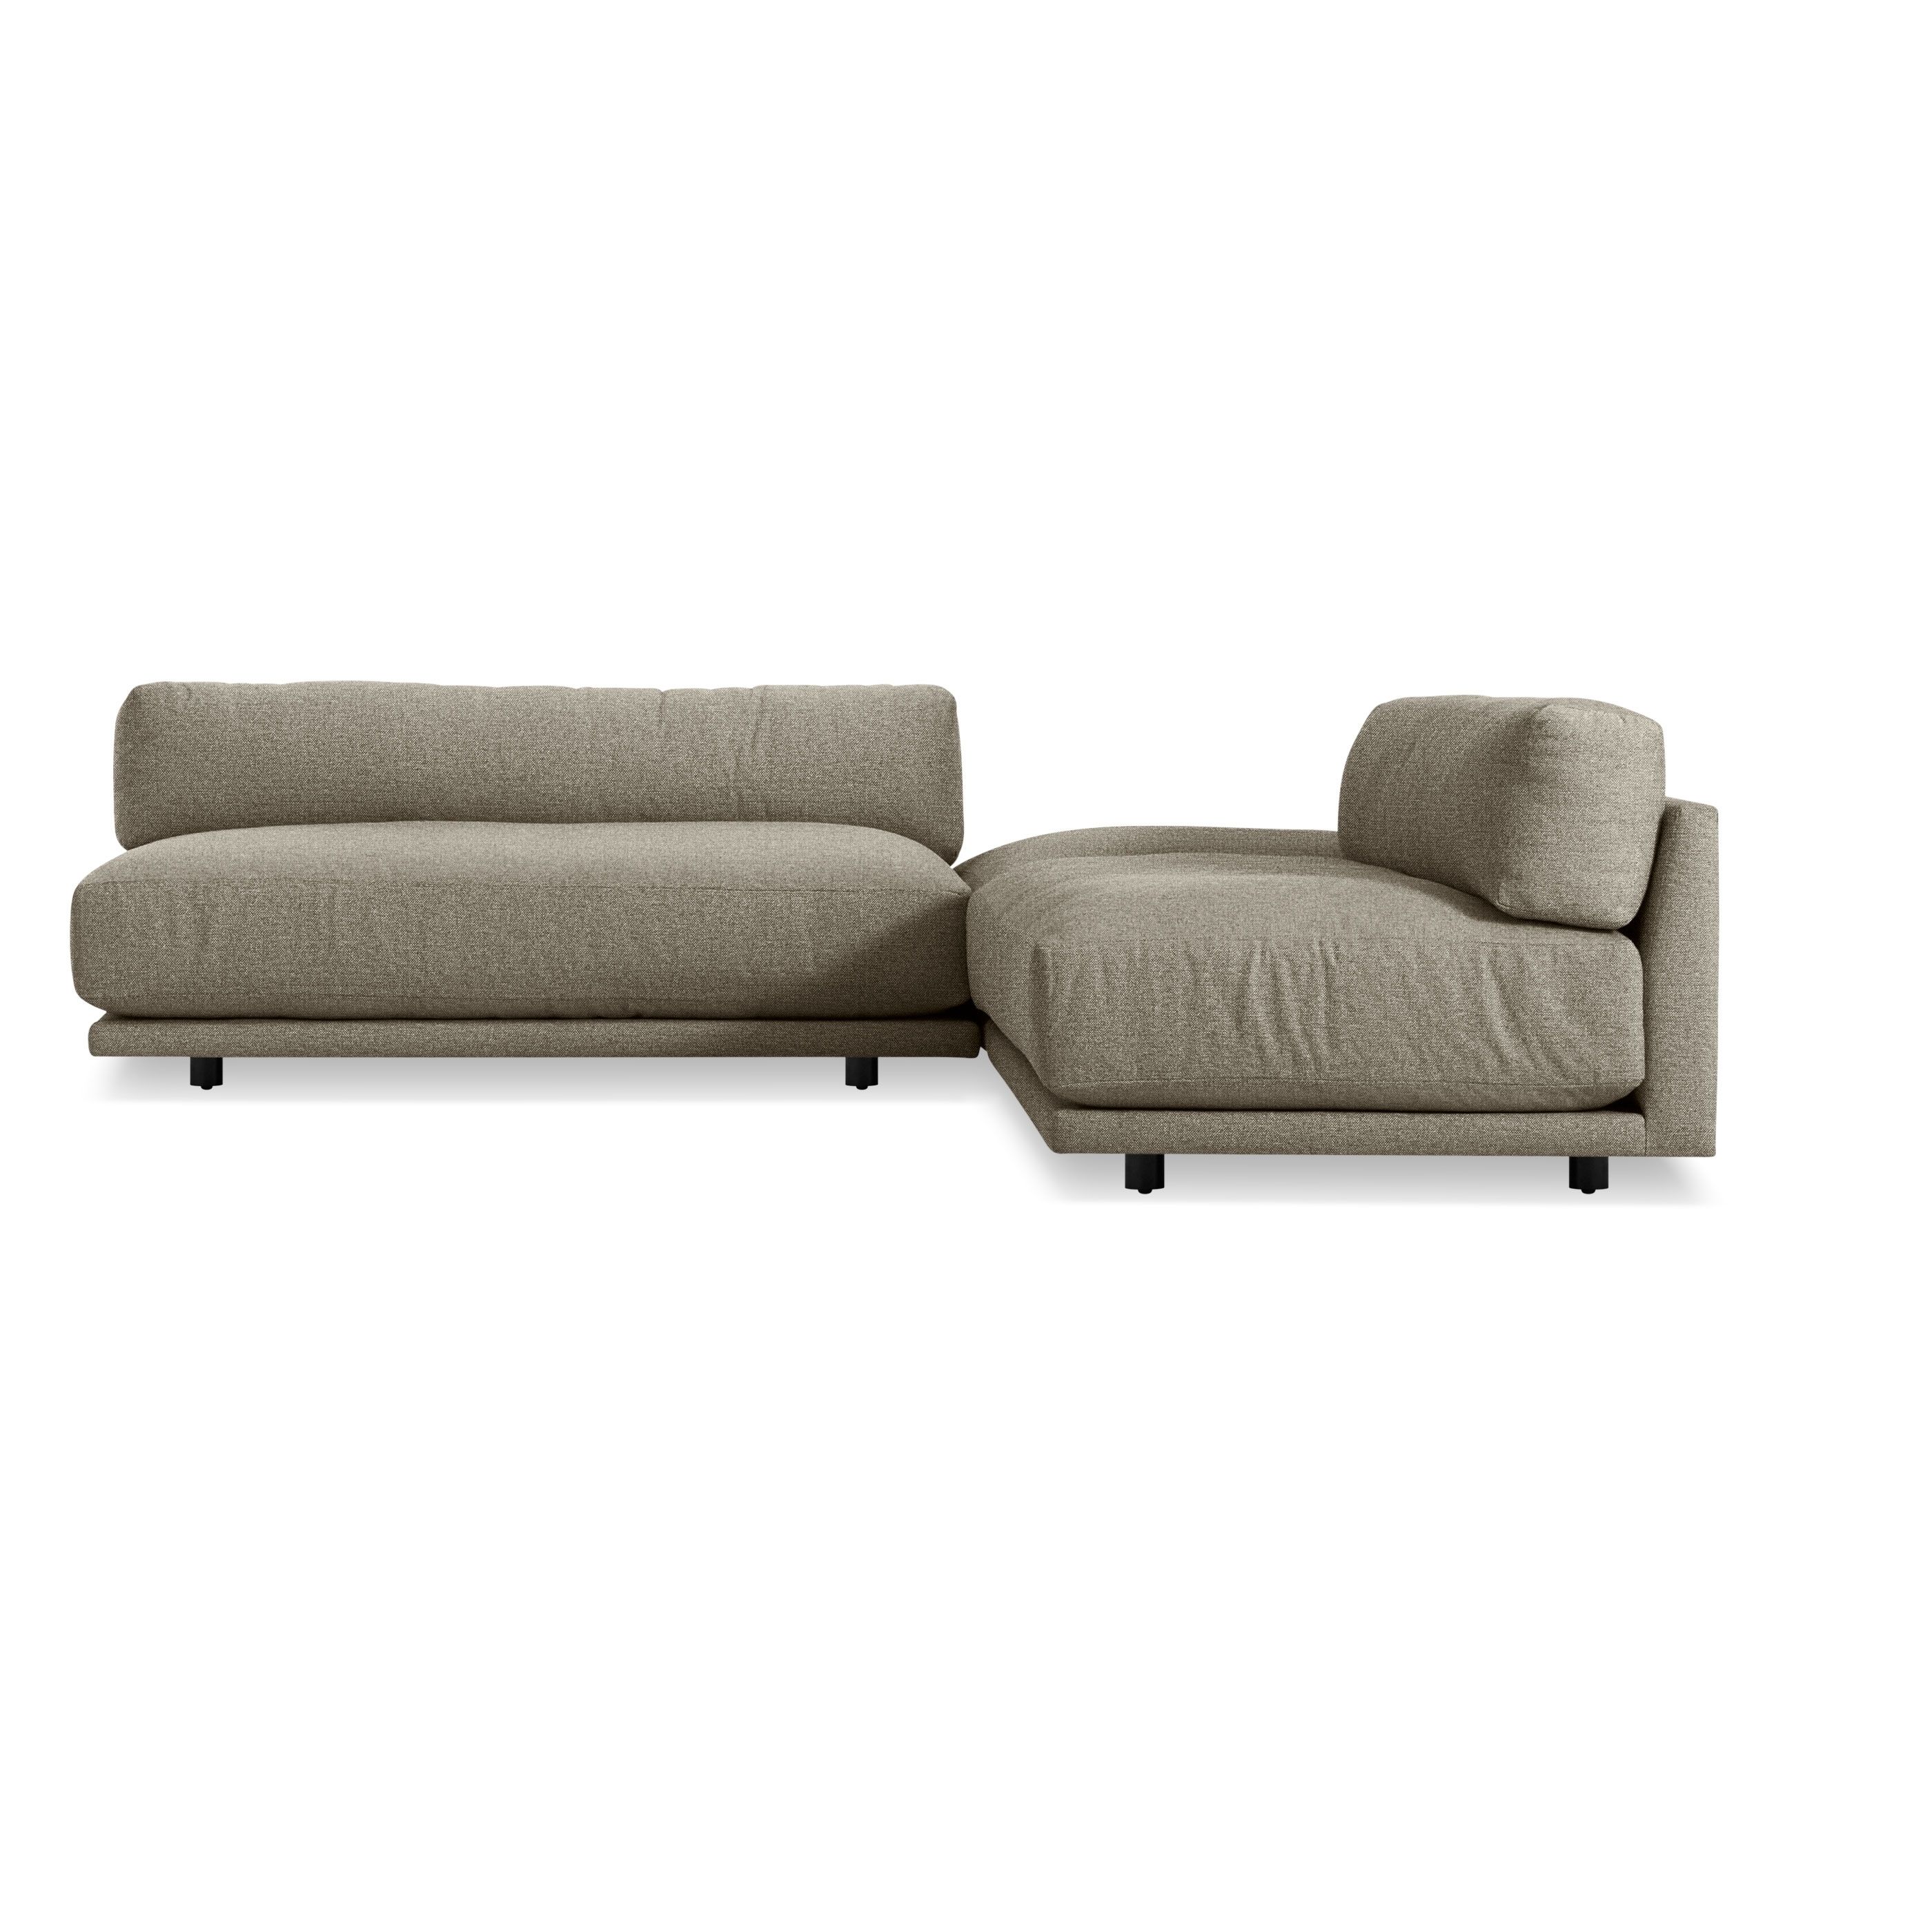 Sunday Small L Sectional Sofa | Blu Dot Pertaining To Newfoundland Sectional Sofas (View 9 of 10)